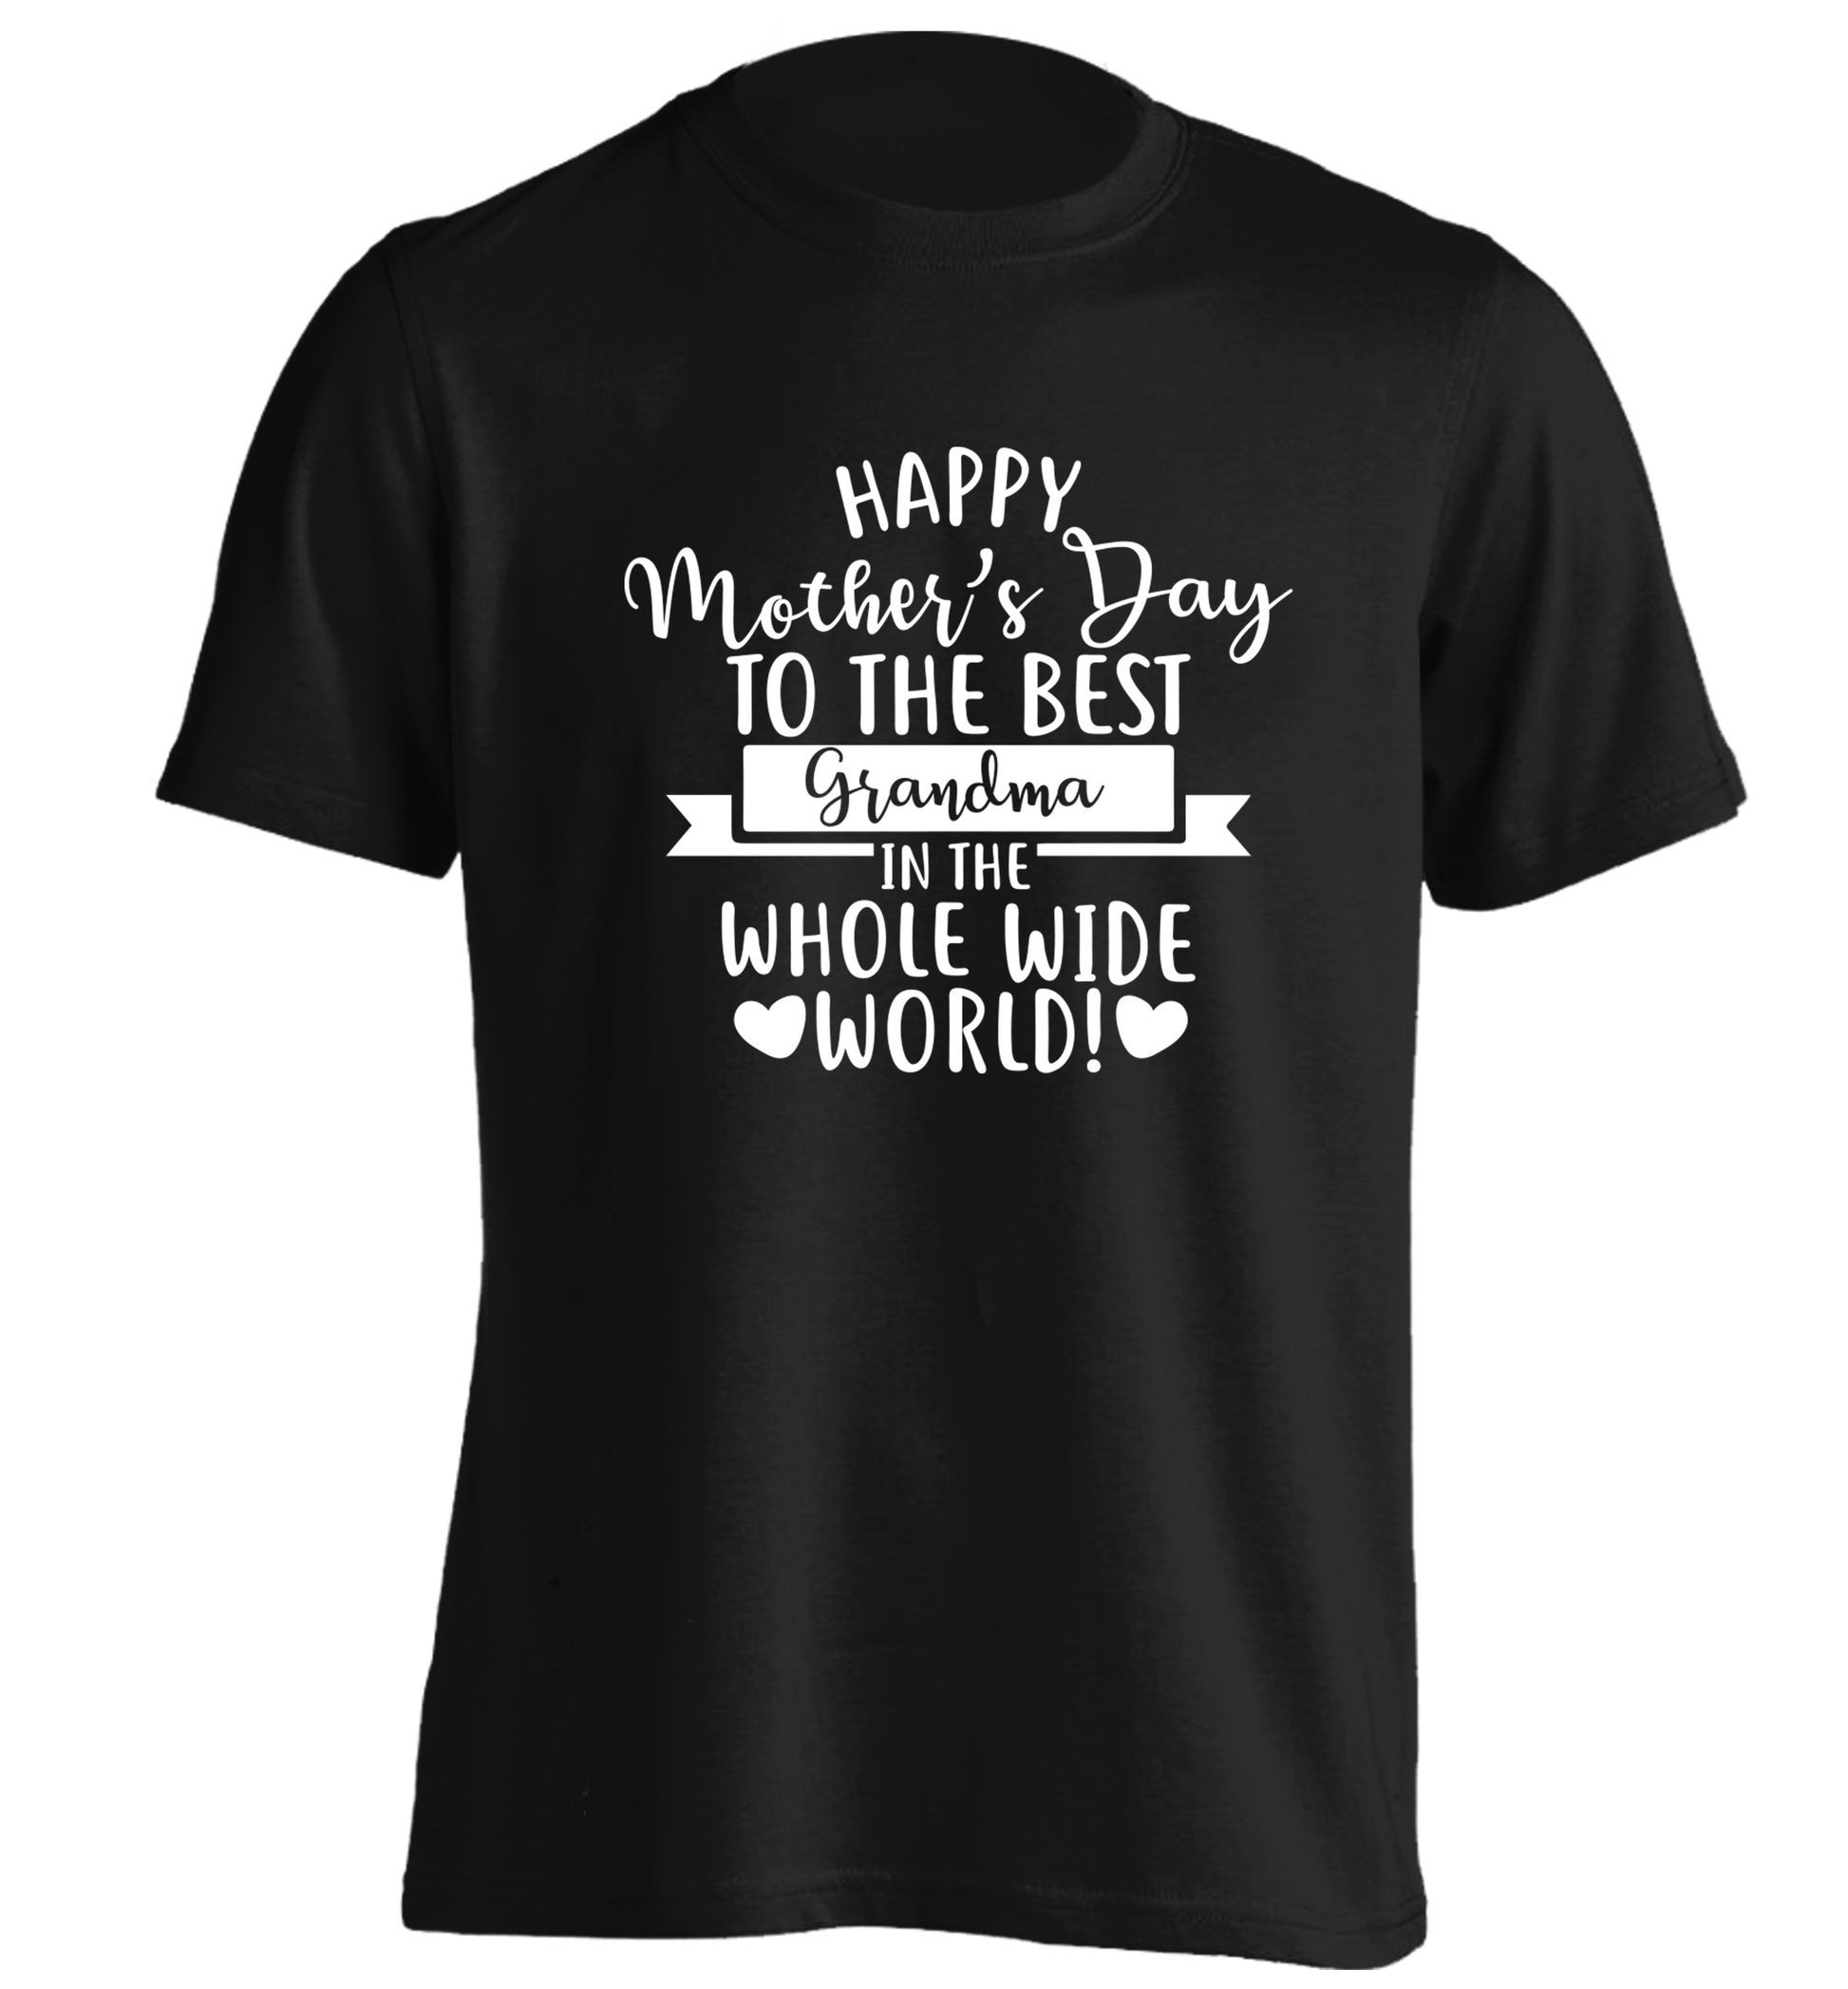 Happy mother's day to the best Grandma in the world adults unisex black Tshirt 2XL